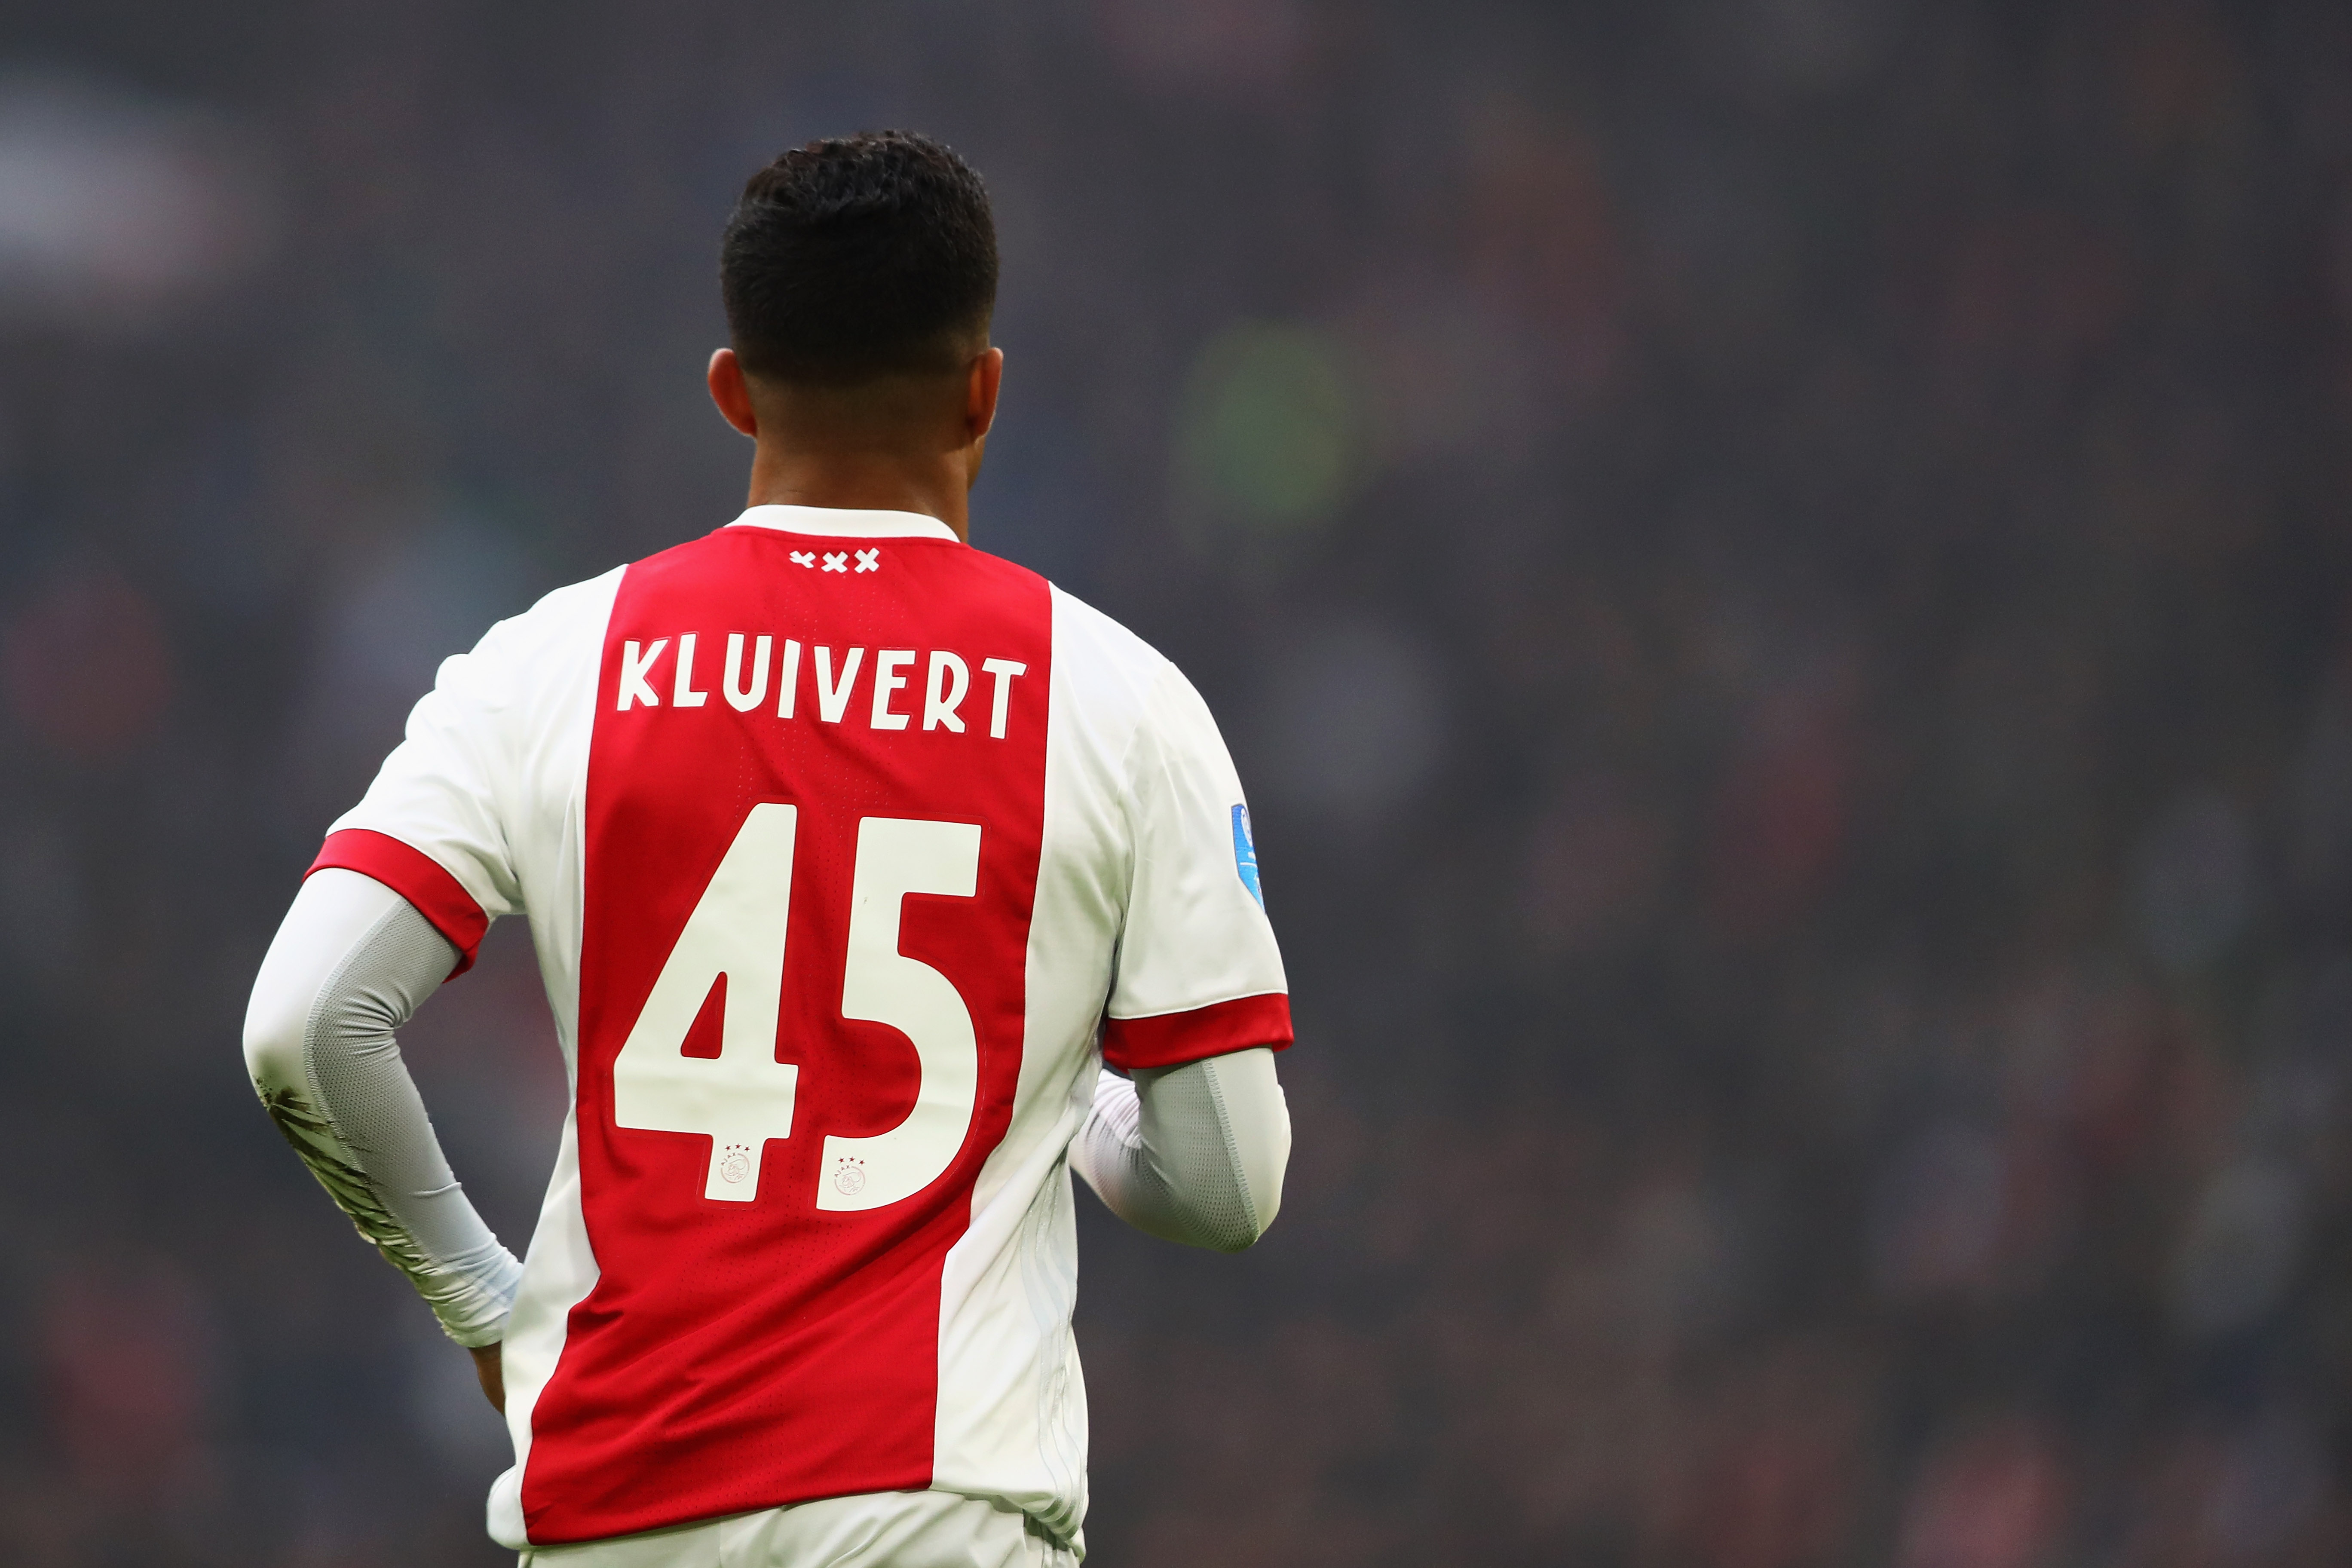 AMSTERDAM, NETHERLANDS - JANUARY 21:  Justin Kluivert of Ajax in action during the Dutch Eredivisie match between Ajax Amsterdam and Feyenoord at Amsterdam ArenA on January 21, 2018 in Amsterdam, Netherlands.  (Photo by Dean Mouhtaropoulos/Getty Images)